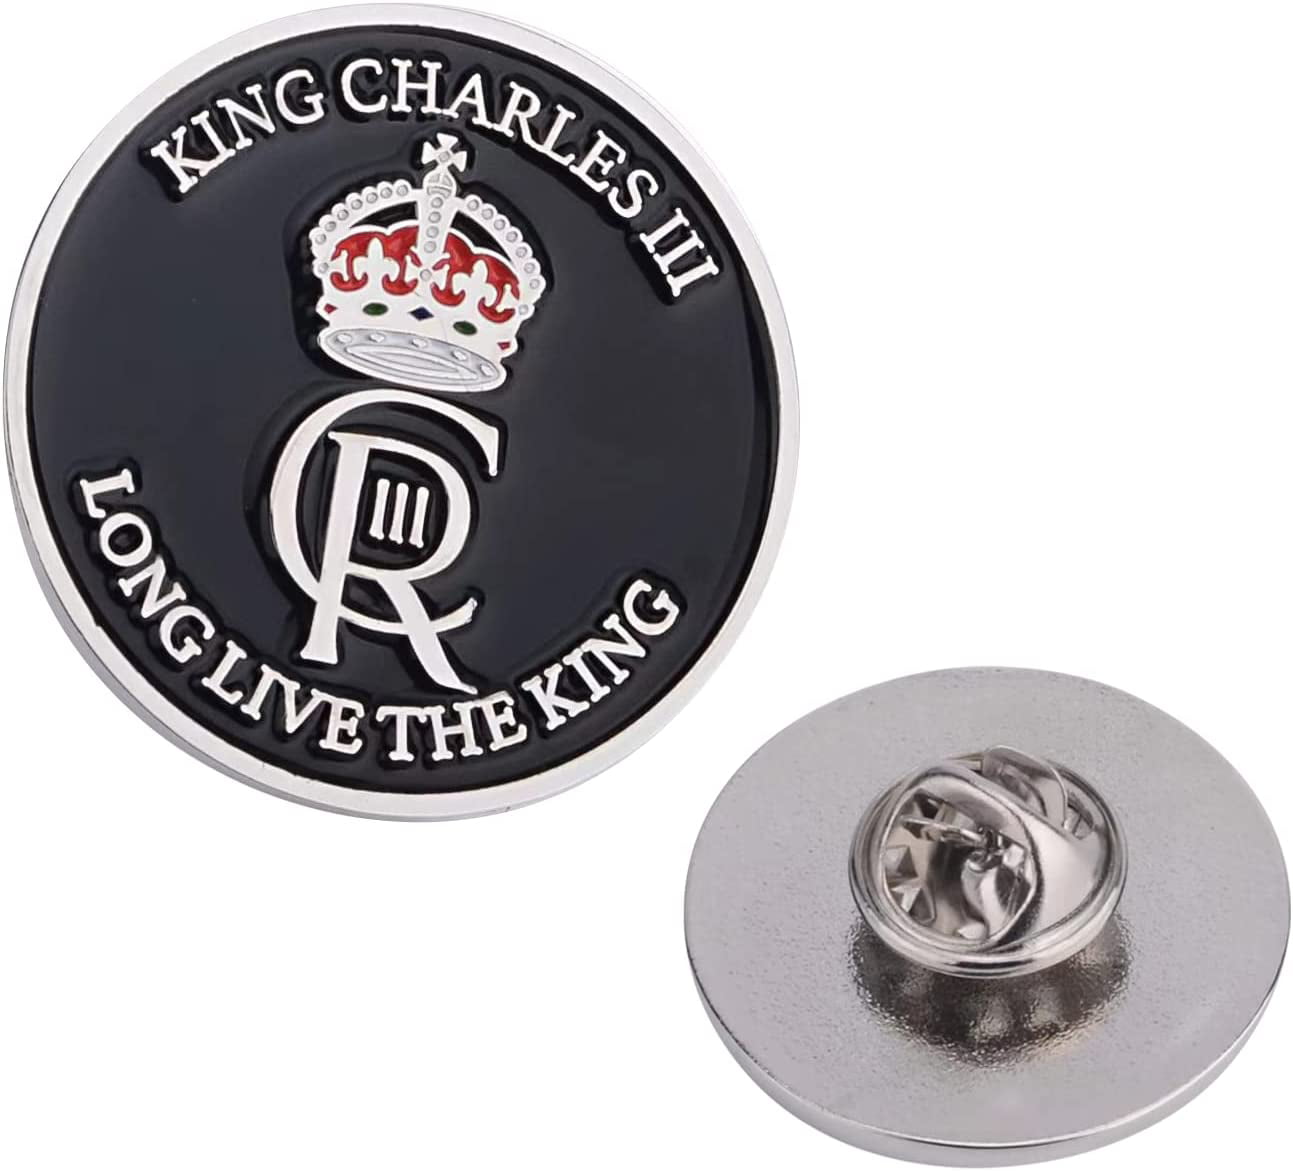 King Charles Jacket Silver Buttons set of 5 - Masonic Supply Shop